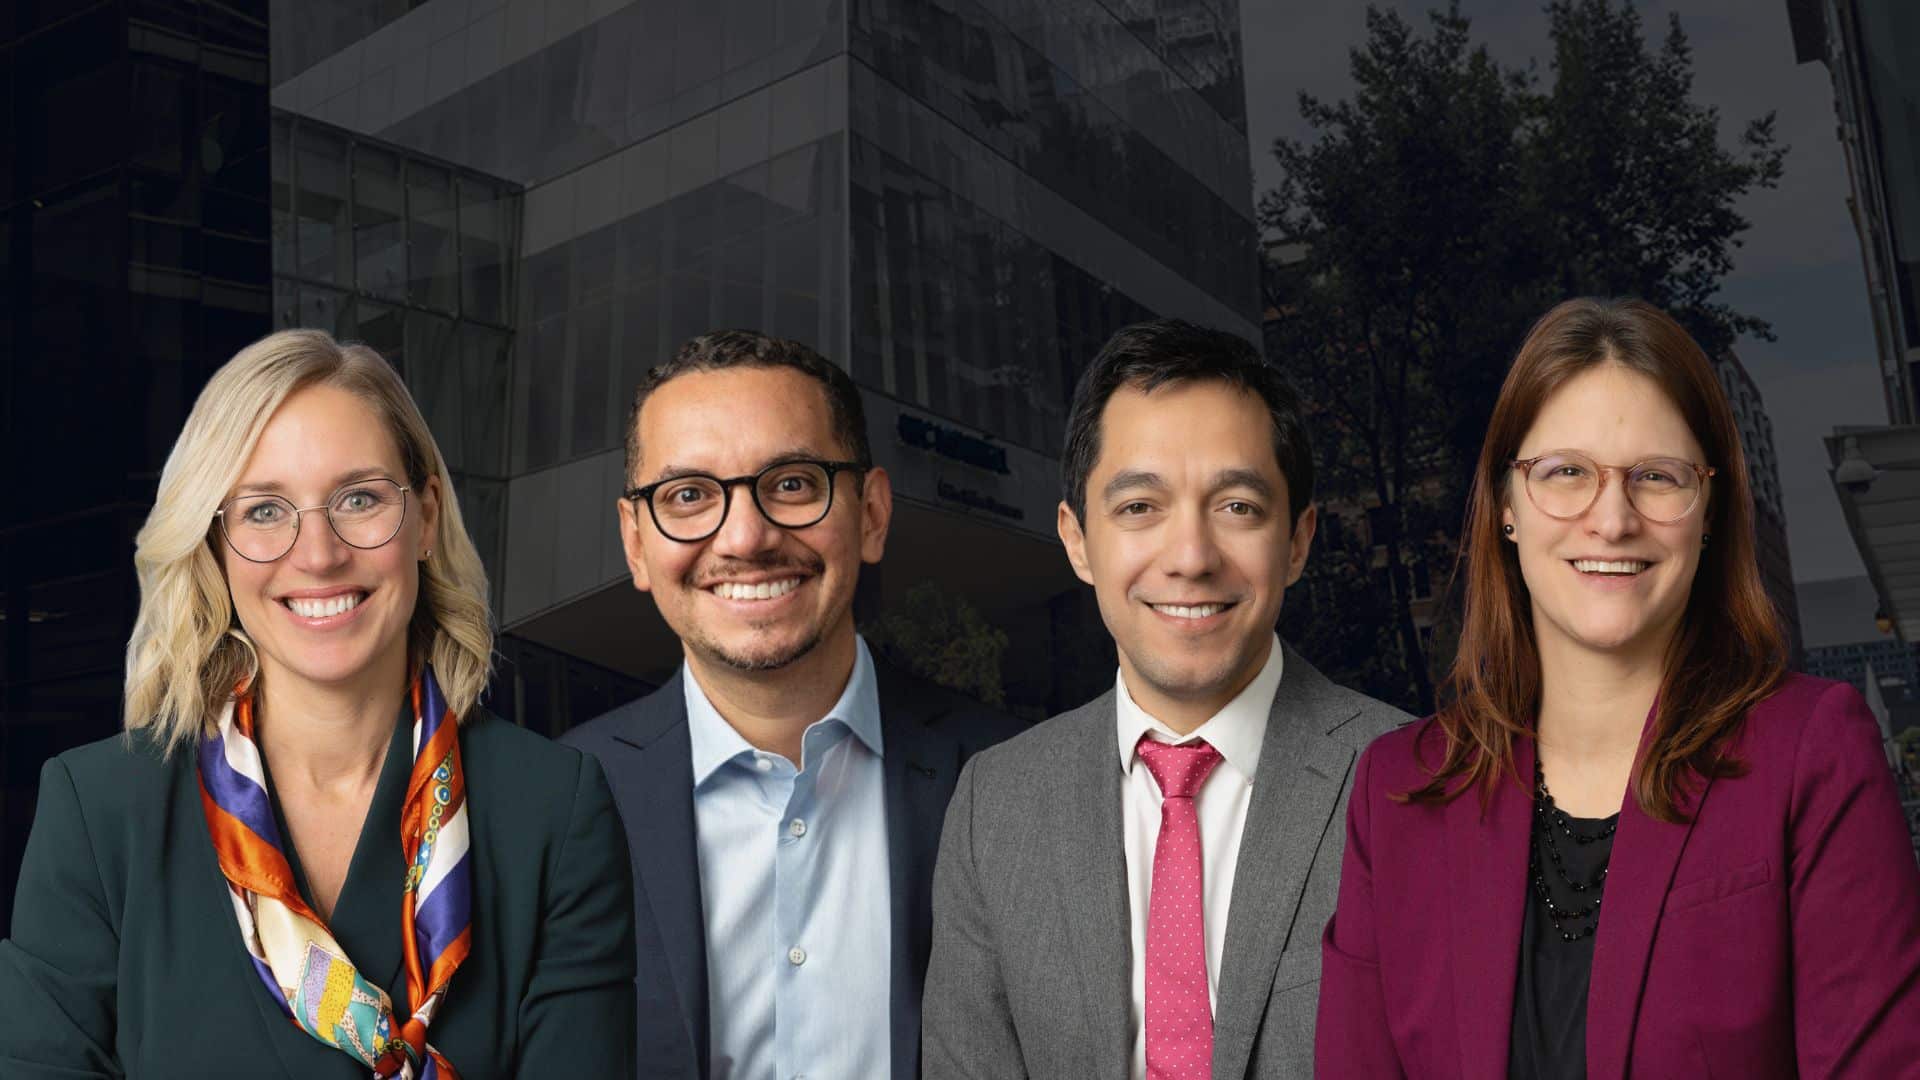 Recent McGill-HEC Montréal Executive MBA program graduates : Diego Mena Martínez, EMBA 2023, Director General of Quebec, Multiple Sclerosis Society of Canada Sebastian Ponce, EMBA 2023, Vice-President Network Planning and Alliances, Air Transat Marie-Sophie Tremblay, EMBA 2023, Vice-President Business Process Transformation, Agropur